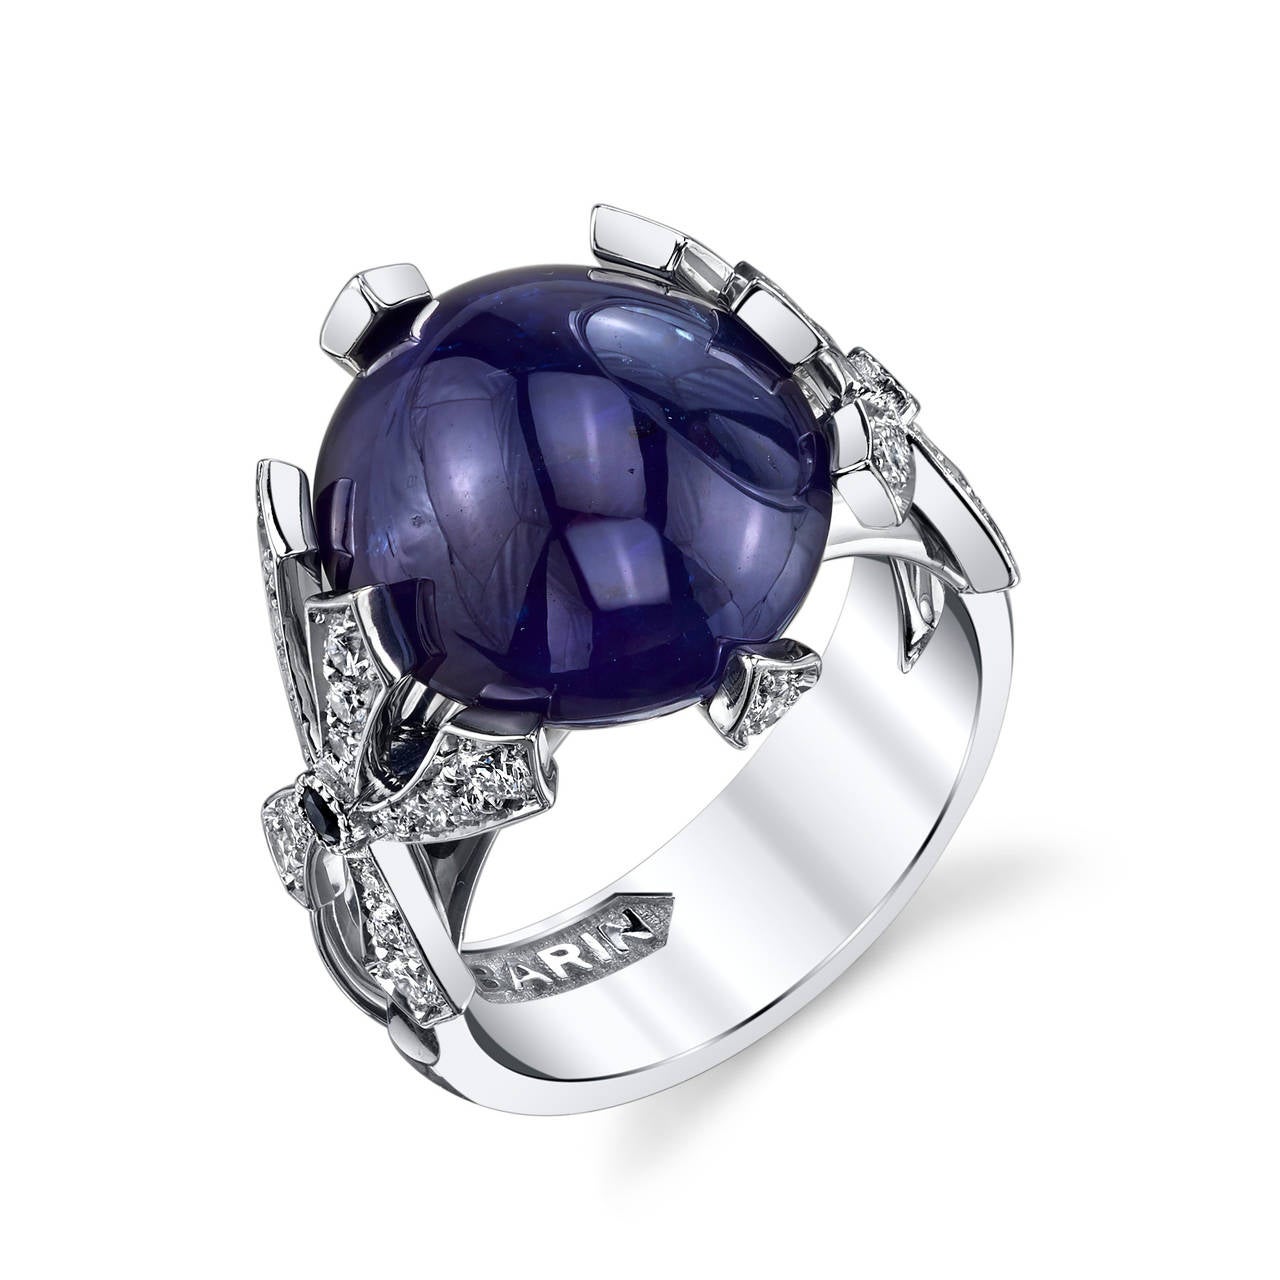 A unique ring with an intricate design,  this is truly a work of art that will get you noticed. The center stone, a GIA Certified Cabochon Cut Sapphire, is suspended by whimsical White Gold prongs that are studded with Diamonds and Sapphires.